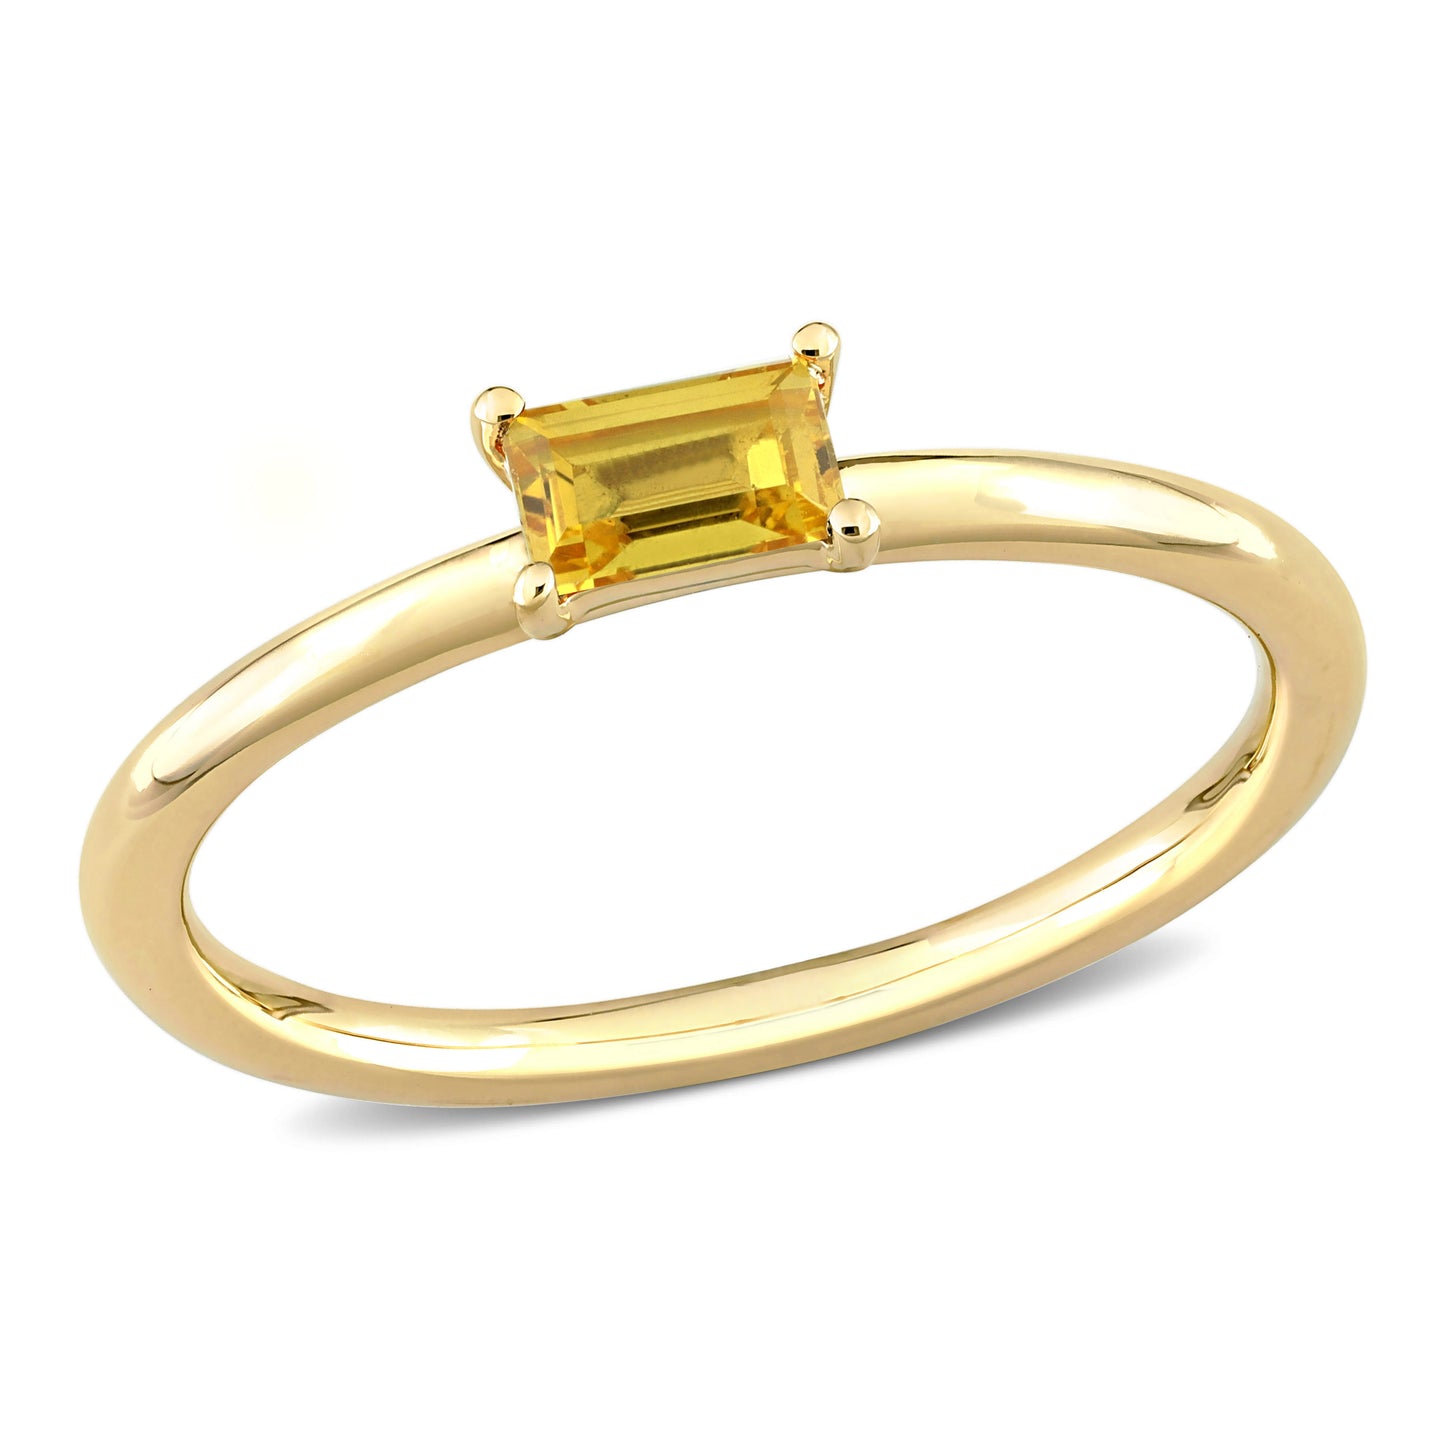 Baguette Cut Yellow Sapphire Ring in 10k Yellow Gold